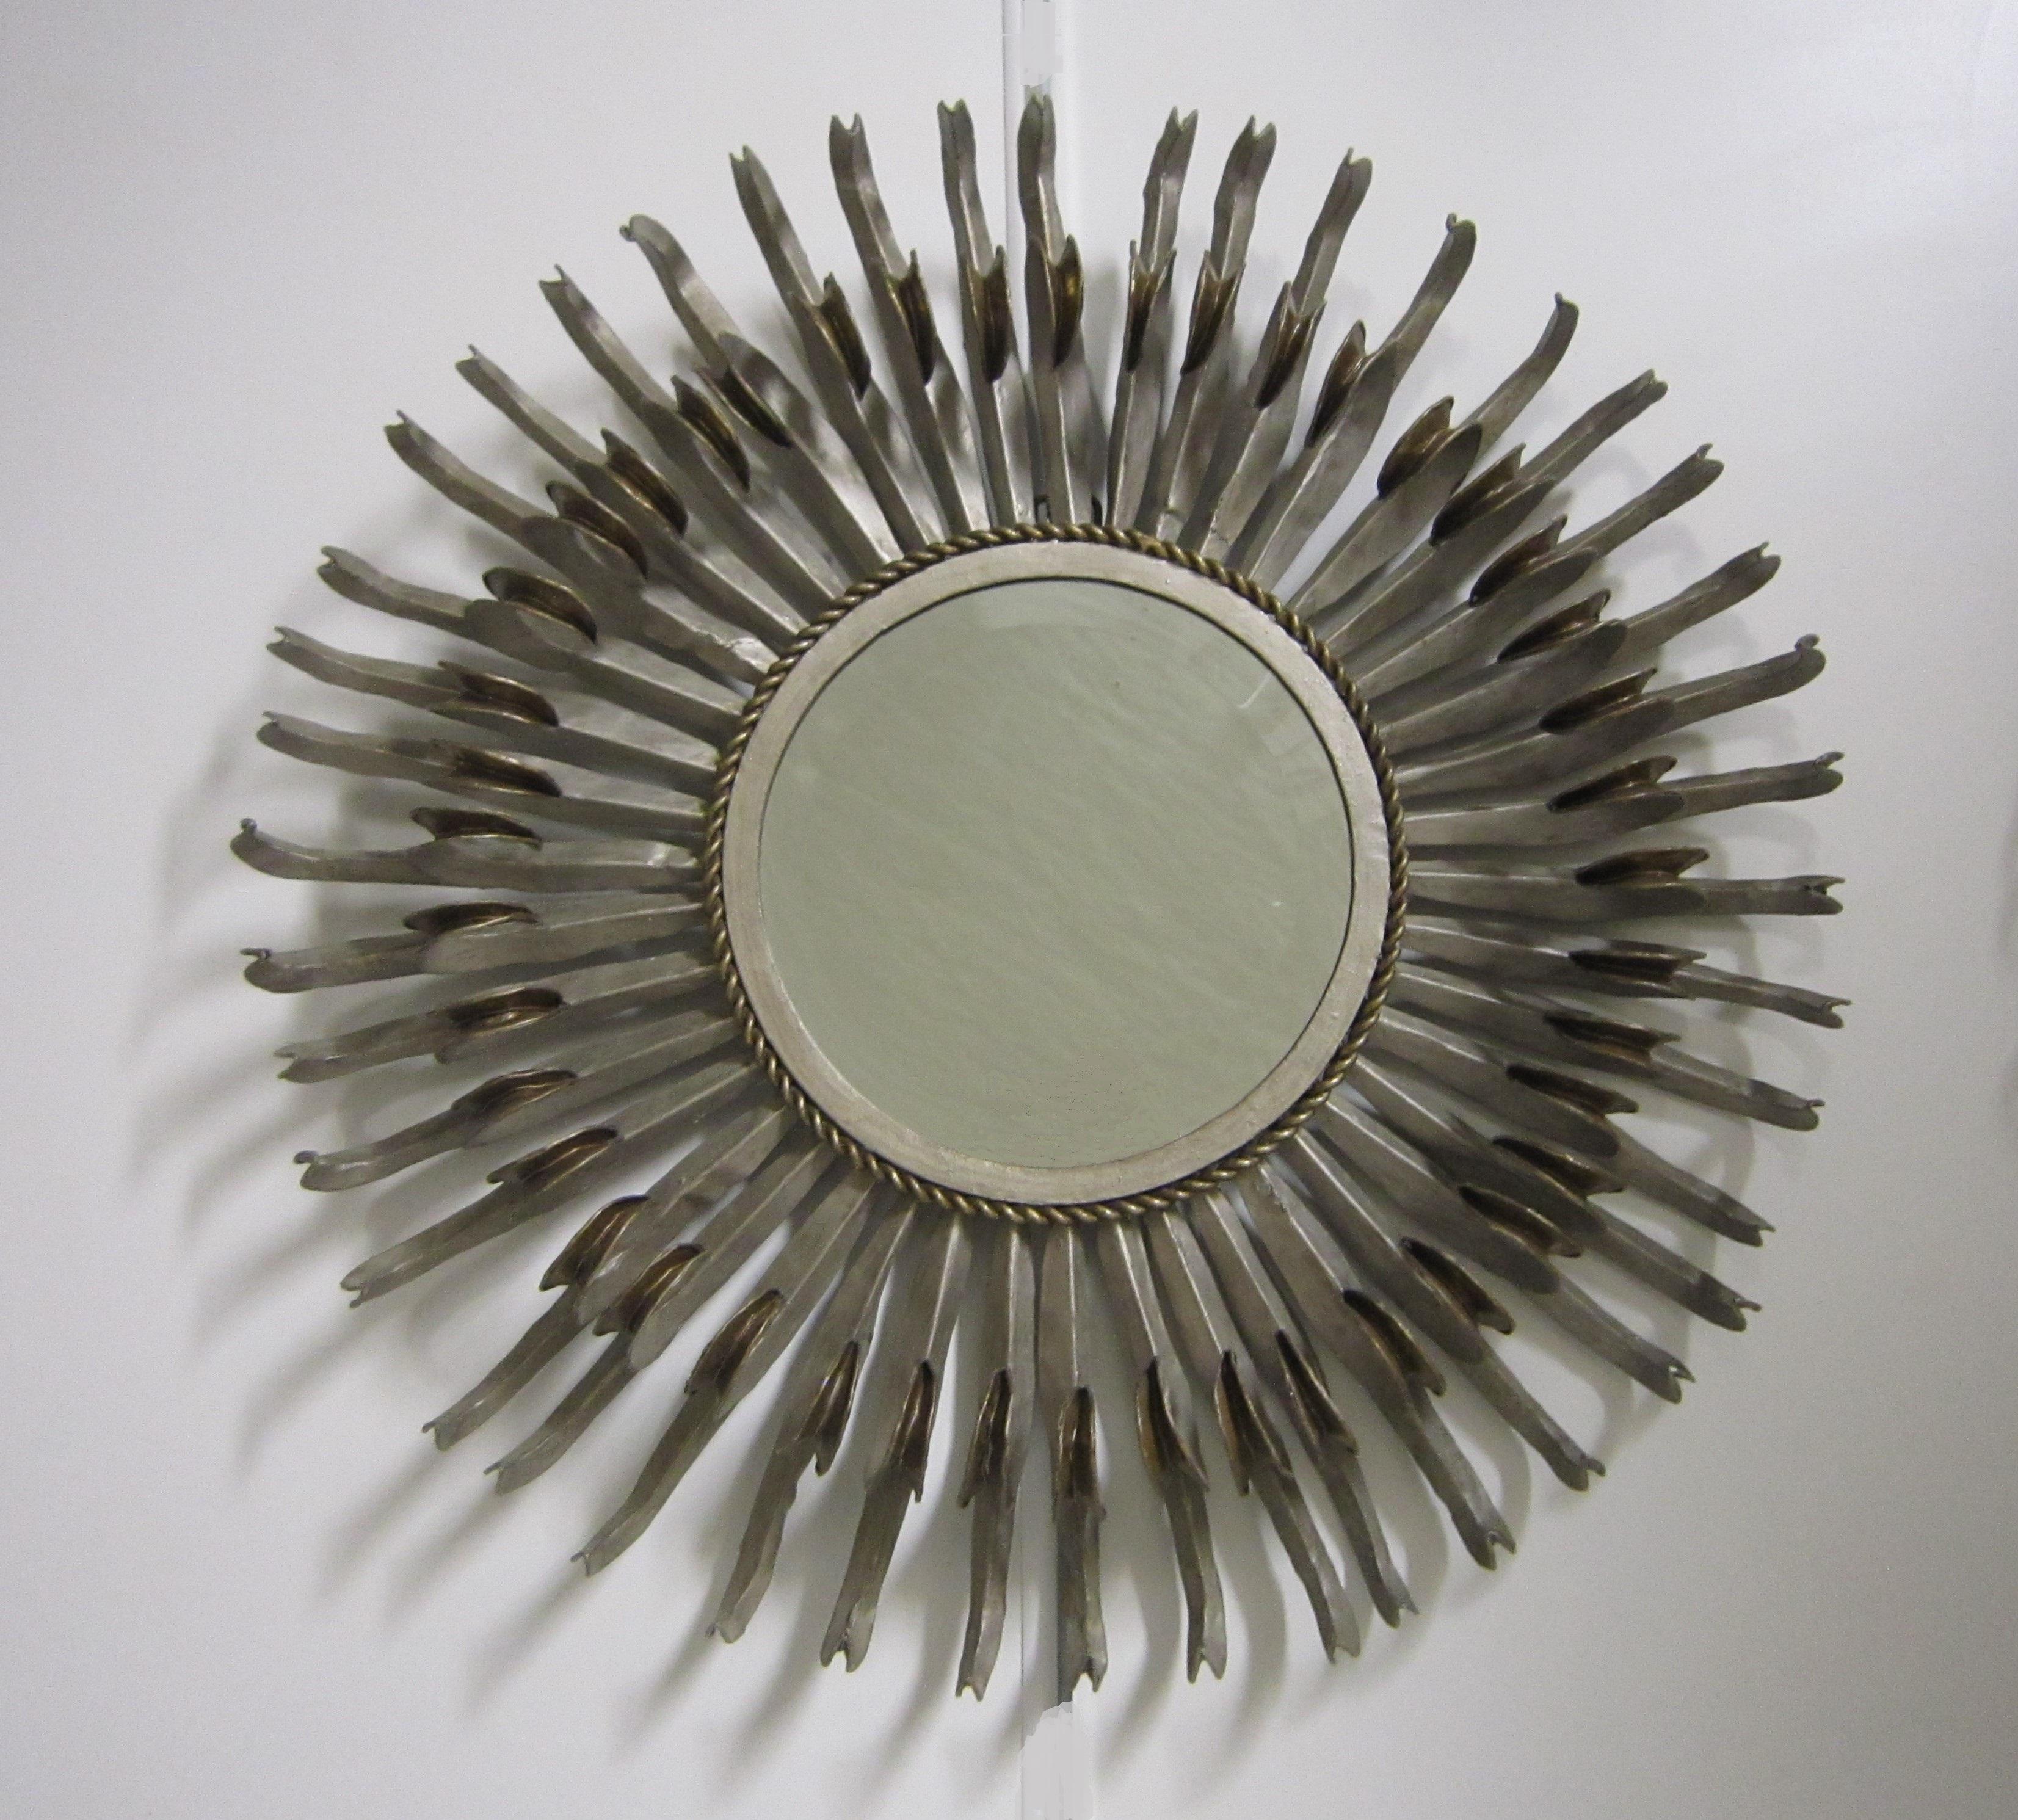 Pair of Midcentury Sunburst / Soleil Mirrors, Silver with Golden Bronze Accents For Sale 4